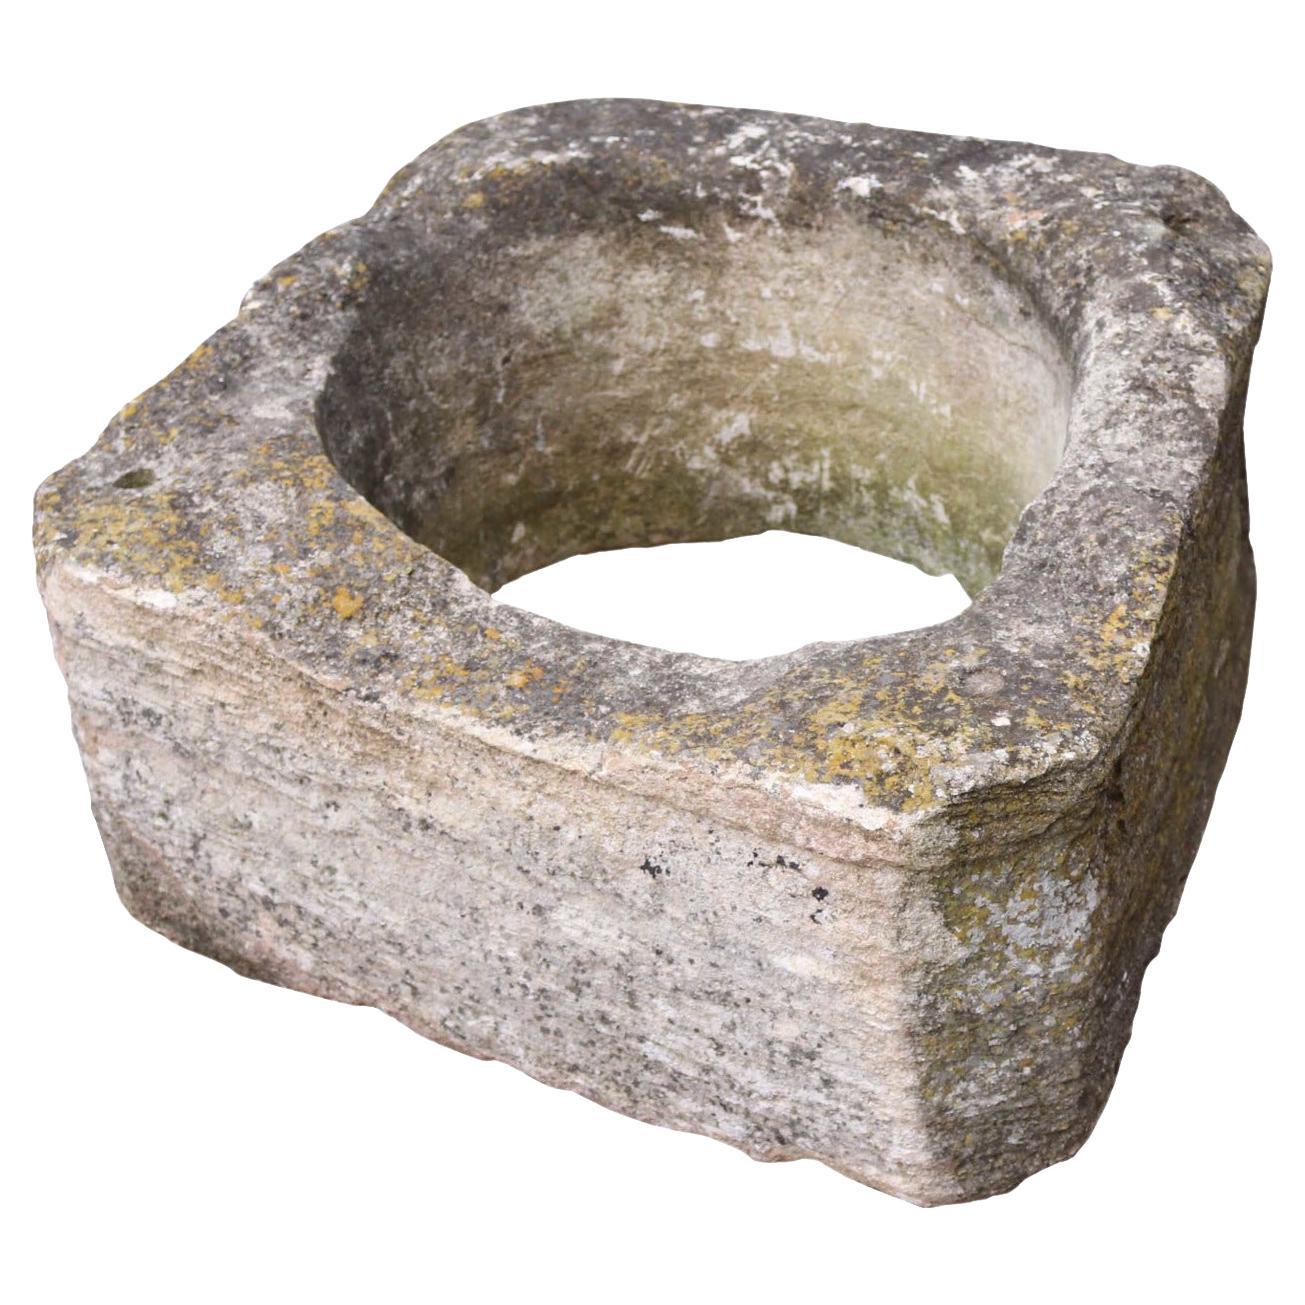 Antique Cotswold Limestone Well 